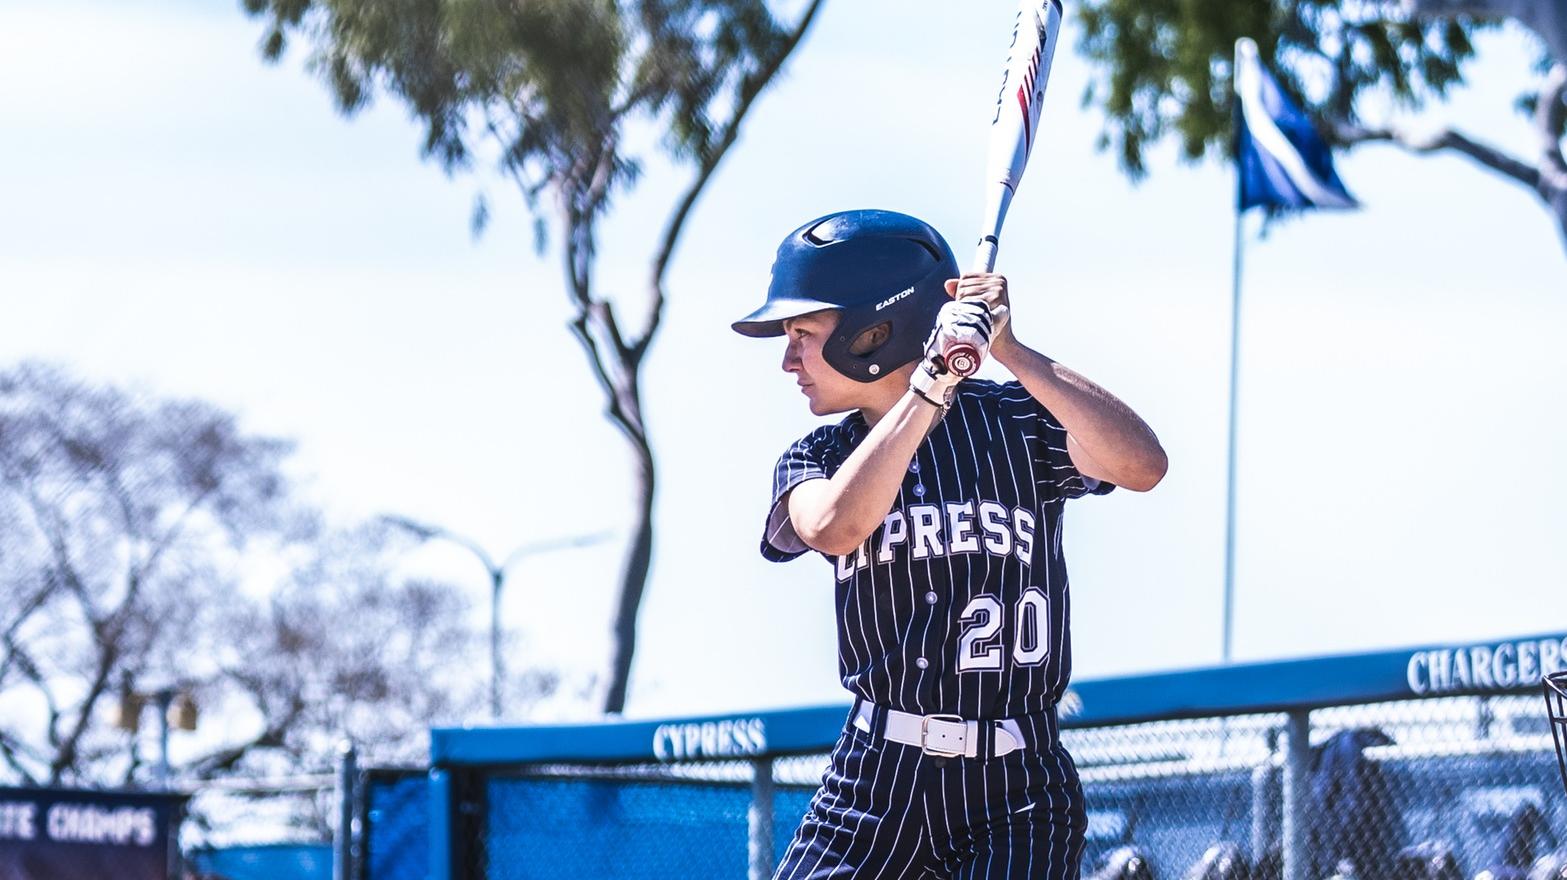 Chargers Collect Two Victories in Doubleheader Against College of the Canyons